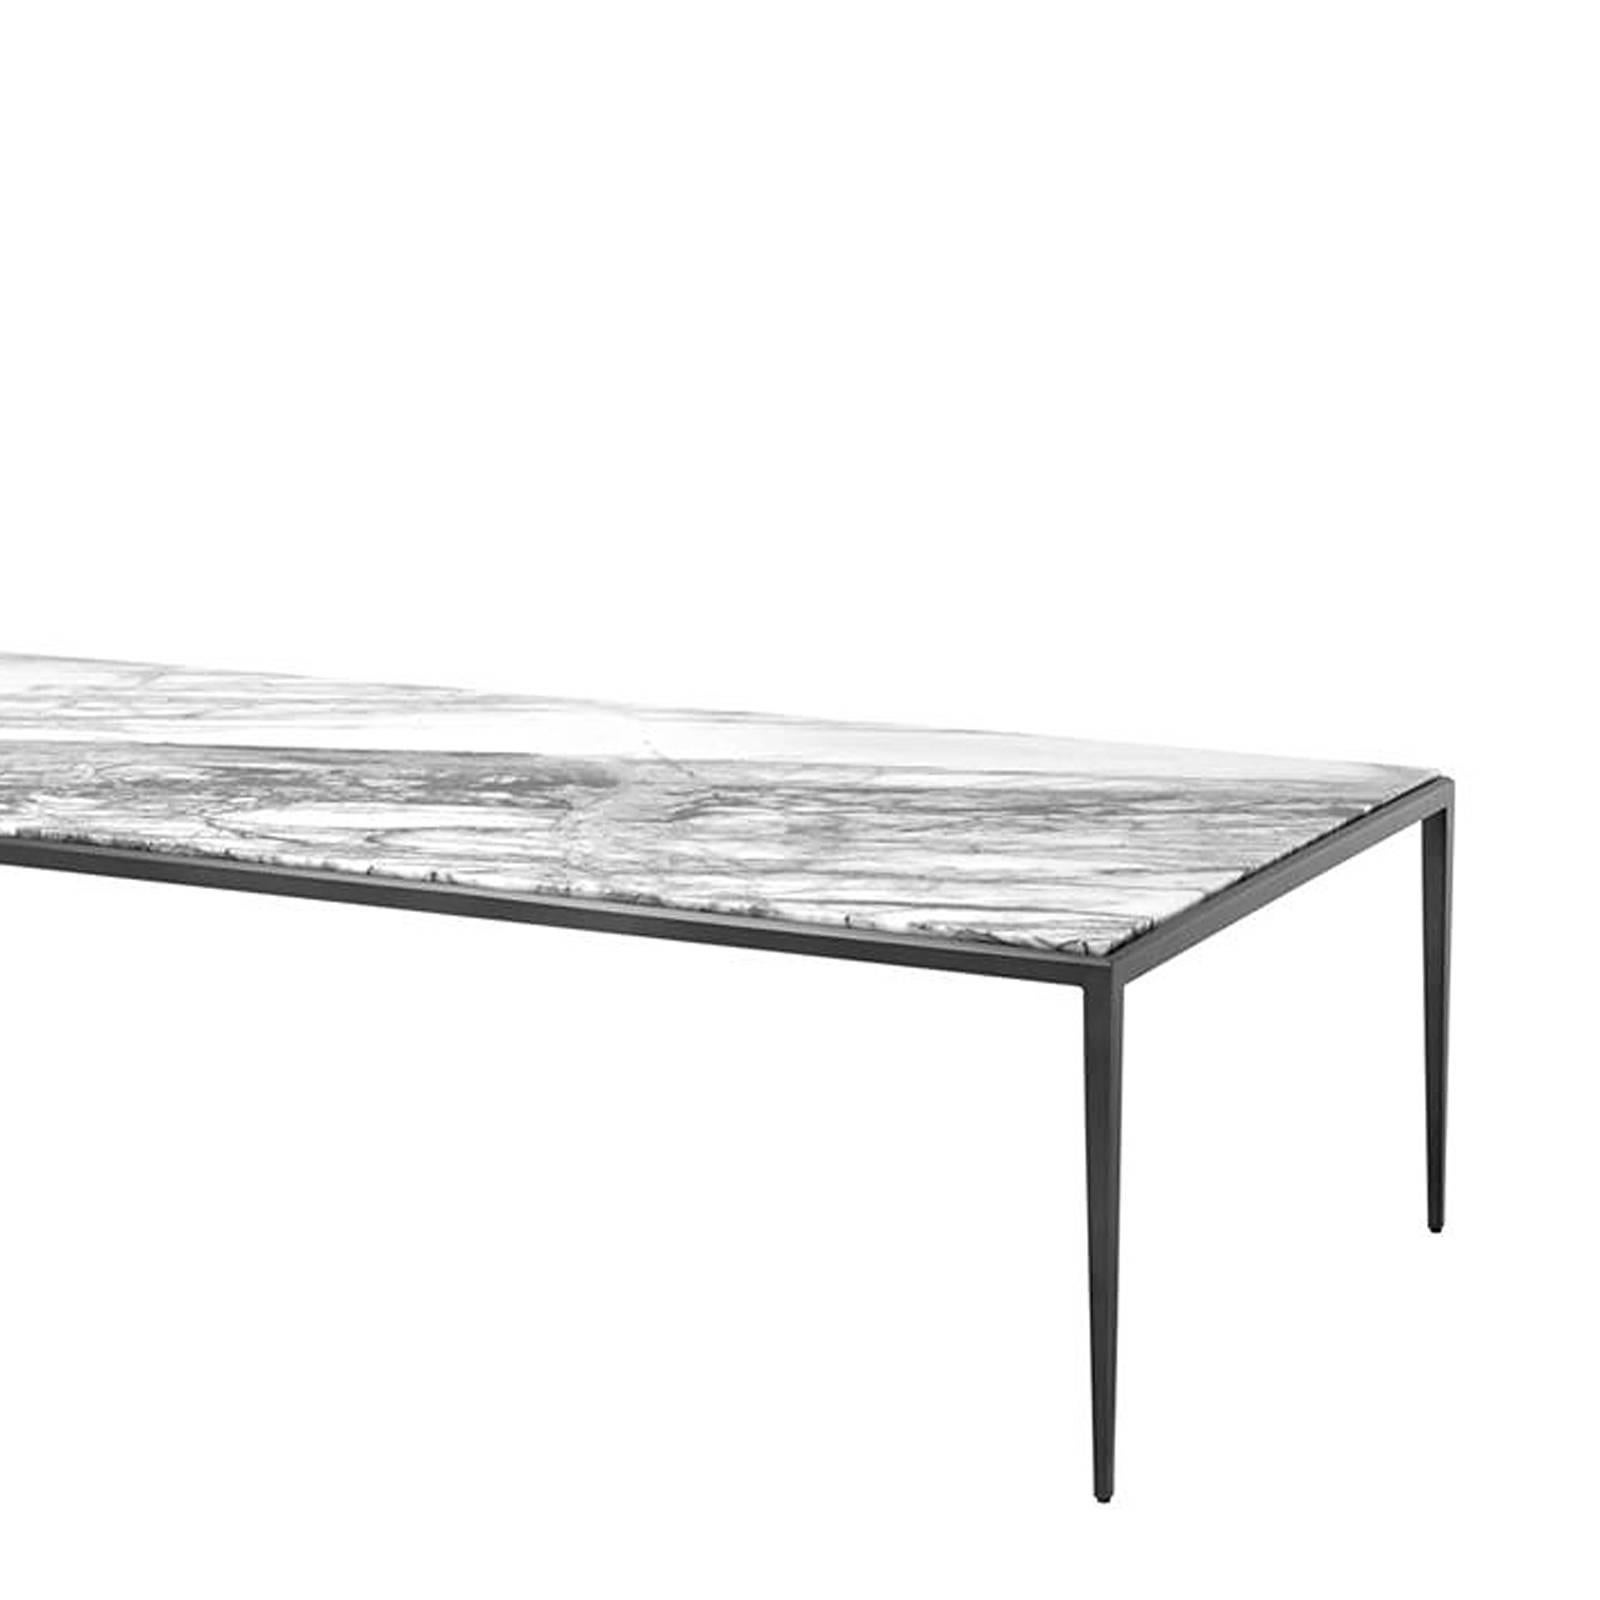 Indonesian Leggy Coffee Table in Bronze Finish with White or Brown Marble Top